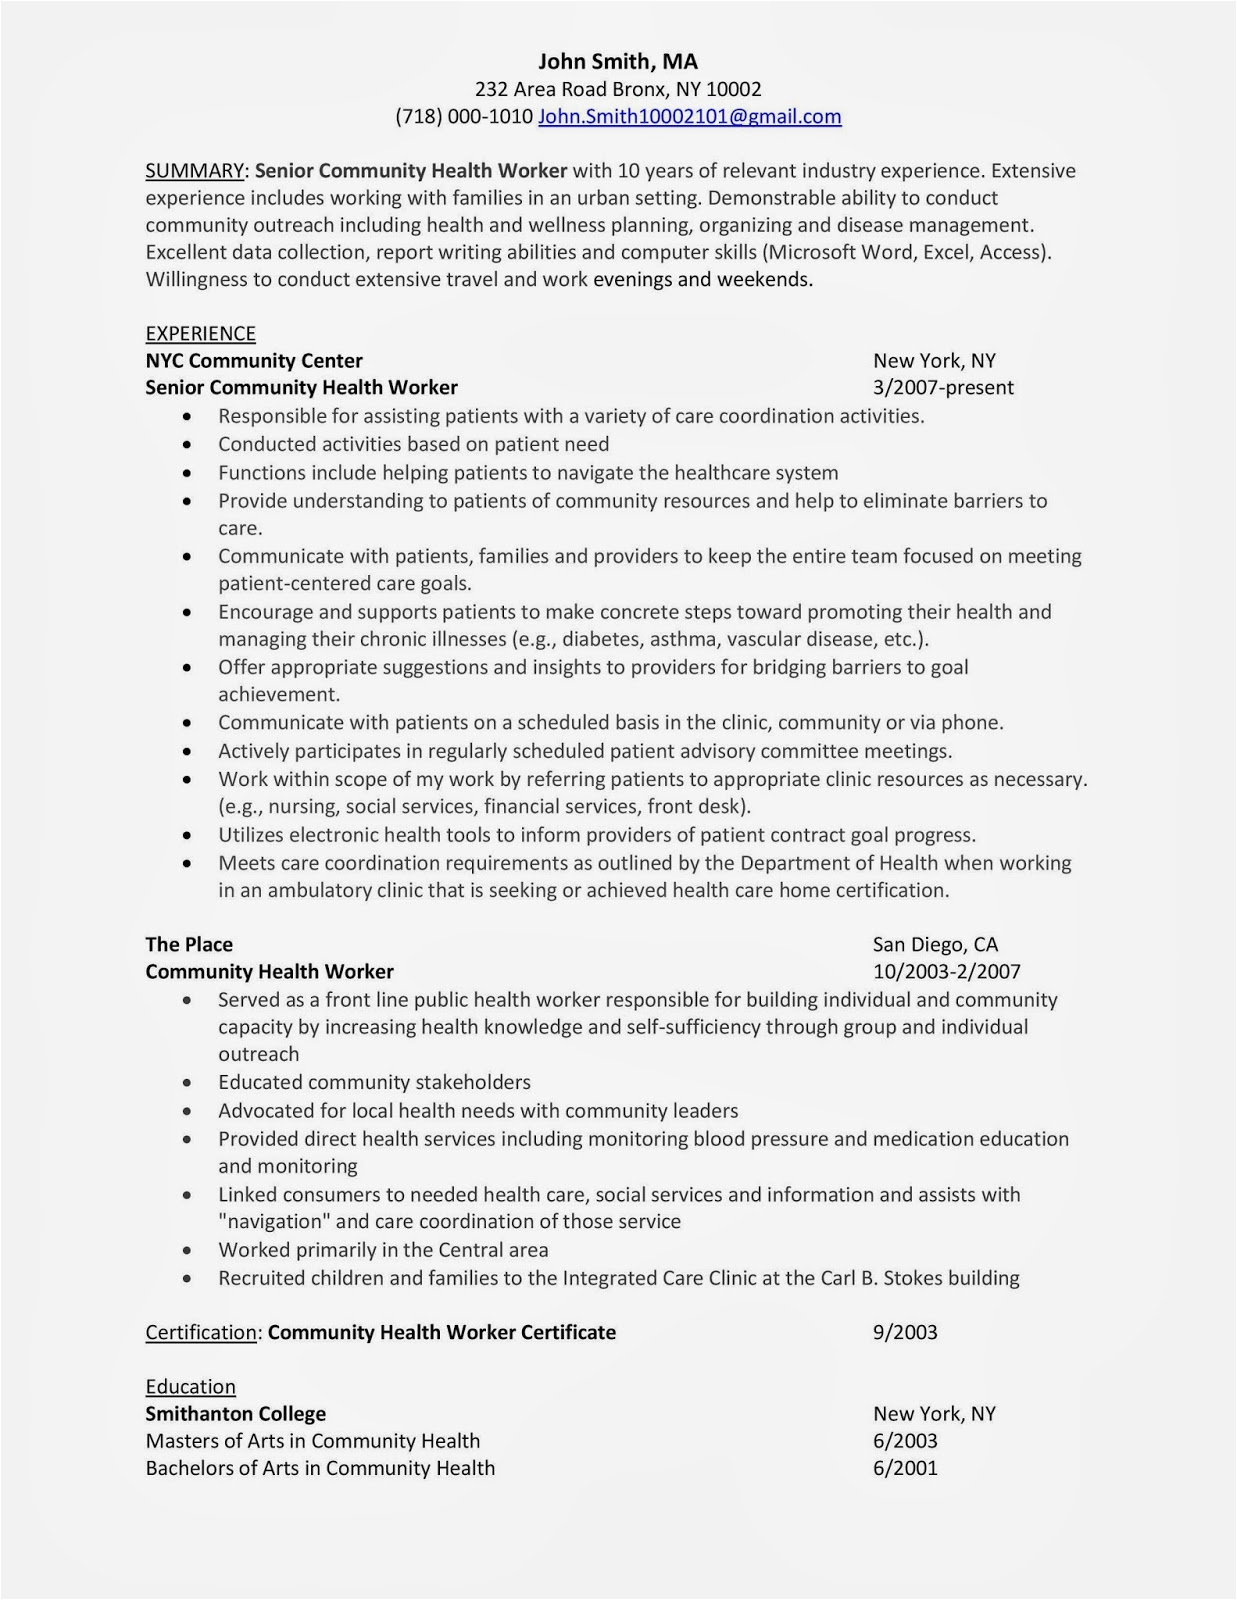 Sample Resume for Aged Care Worker with No Experience Australia 12 13 Cover Letter for Aged Care Worker